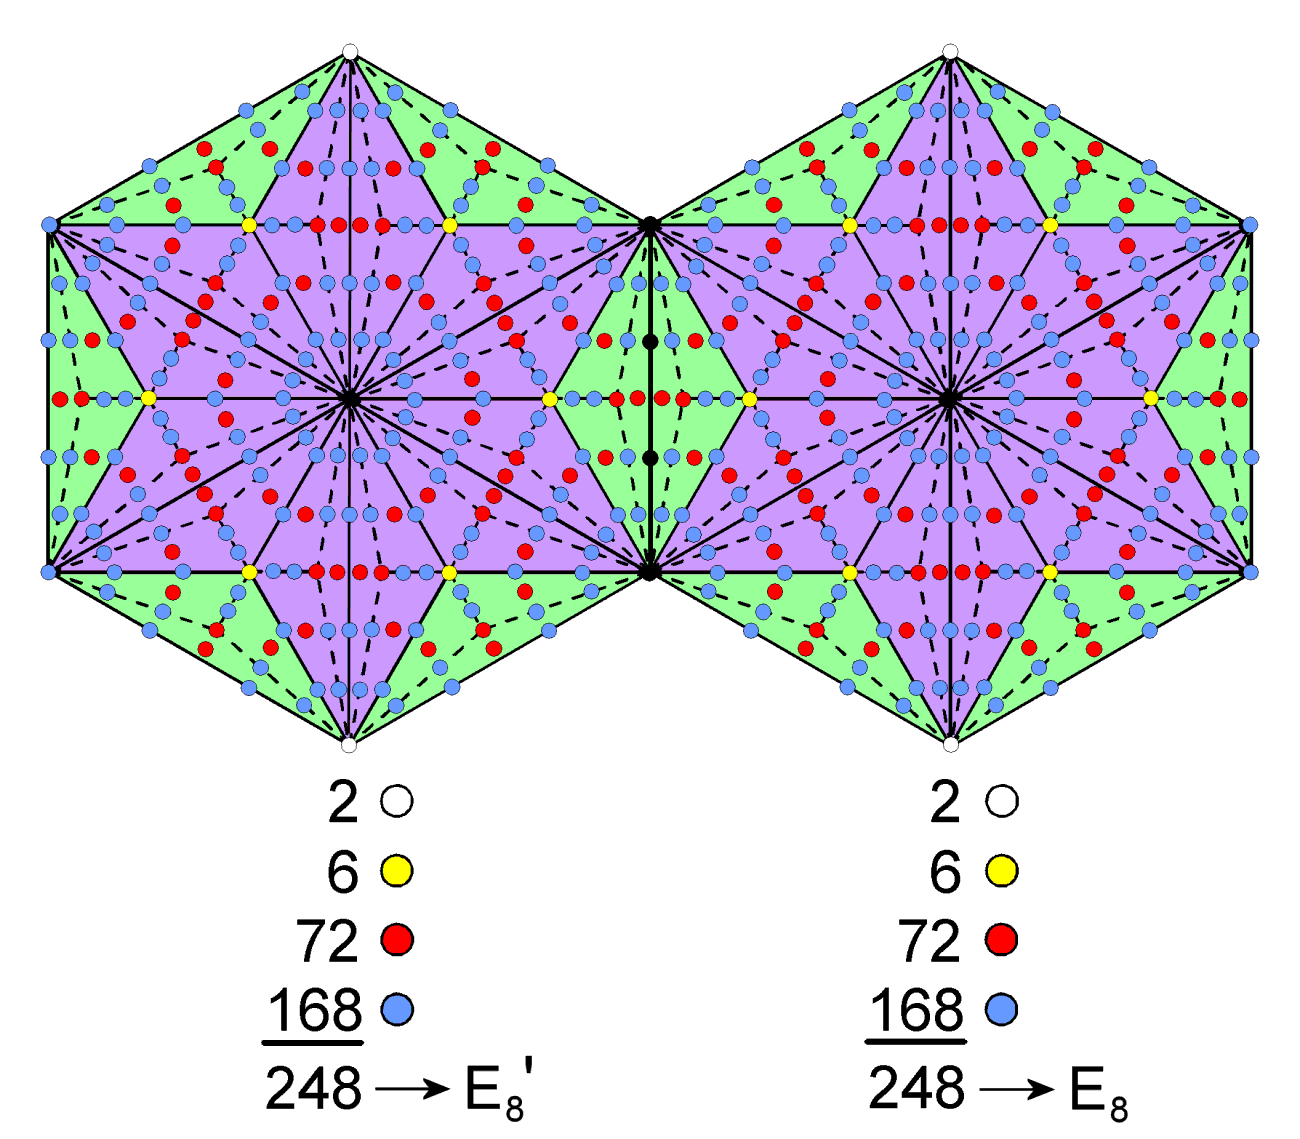 (248+248) yods outside root edge surround centres of two joined Type C hexagons